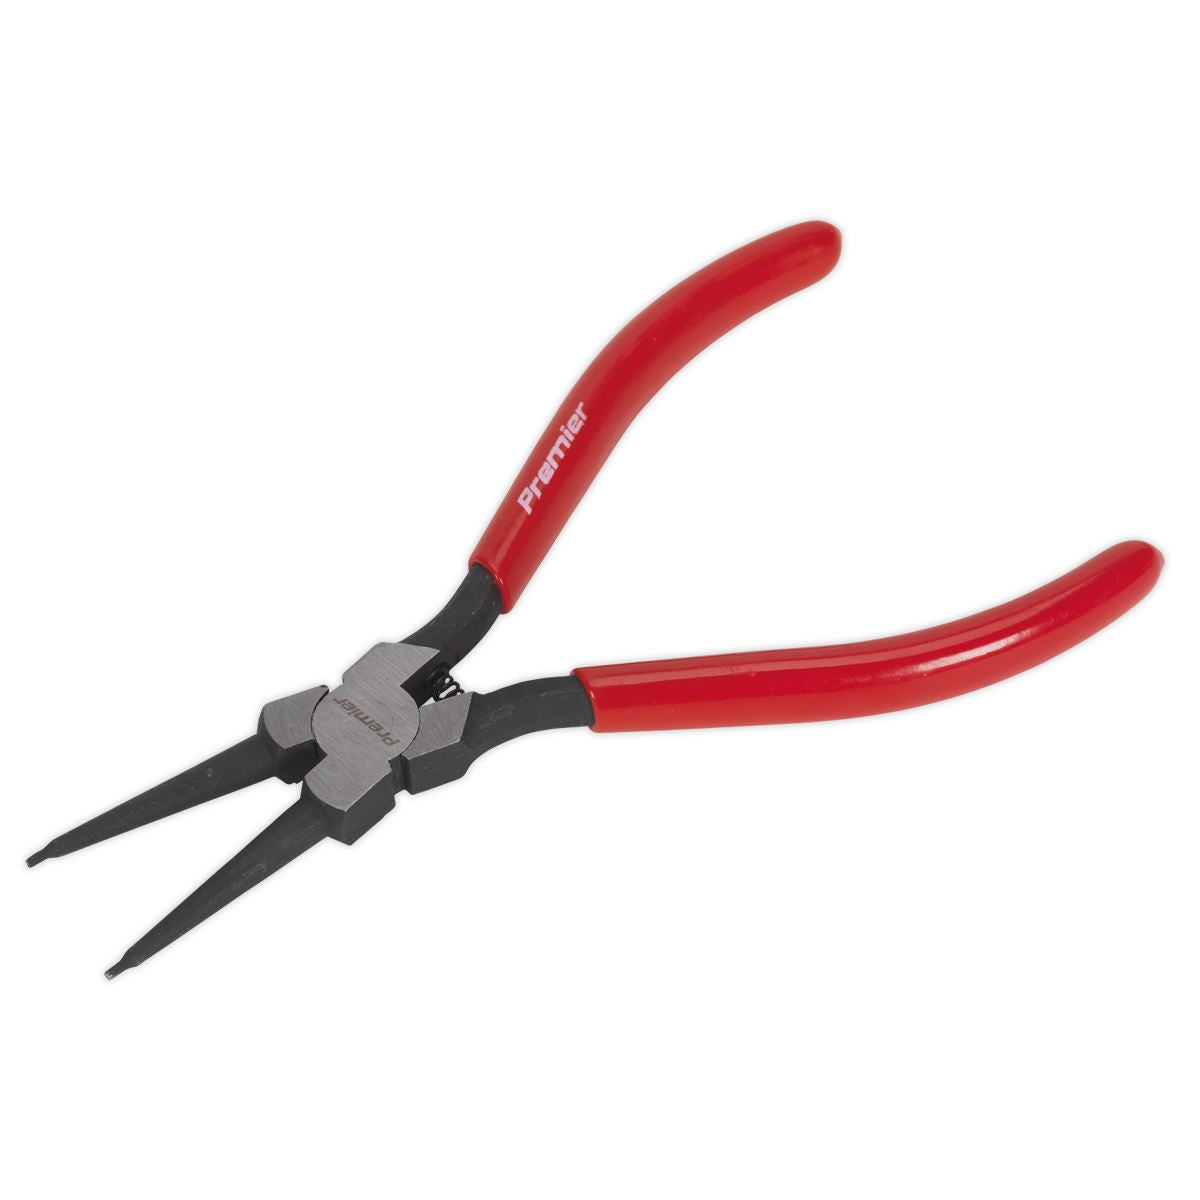 Sealey Premier Circlip Pliers Internal Straight Nose 180mm